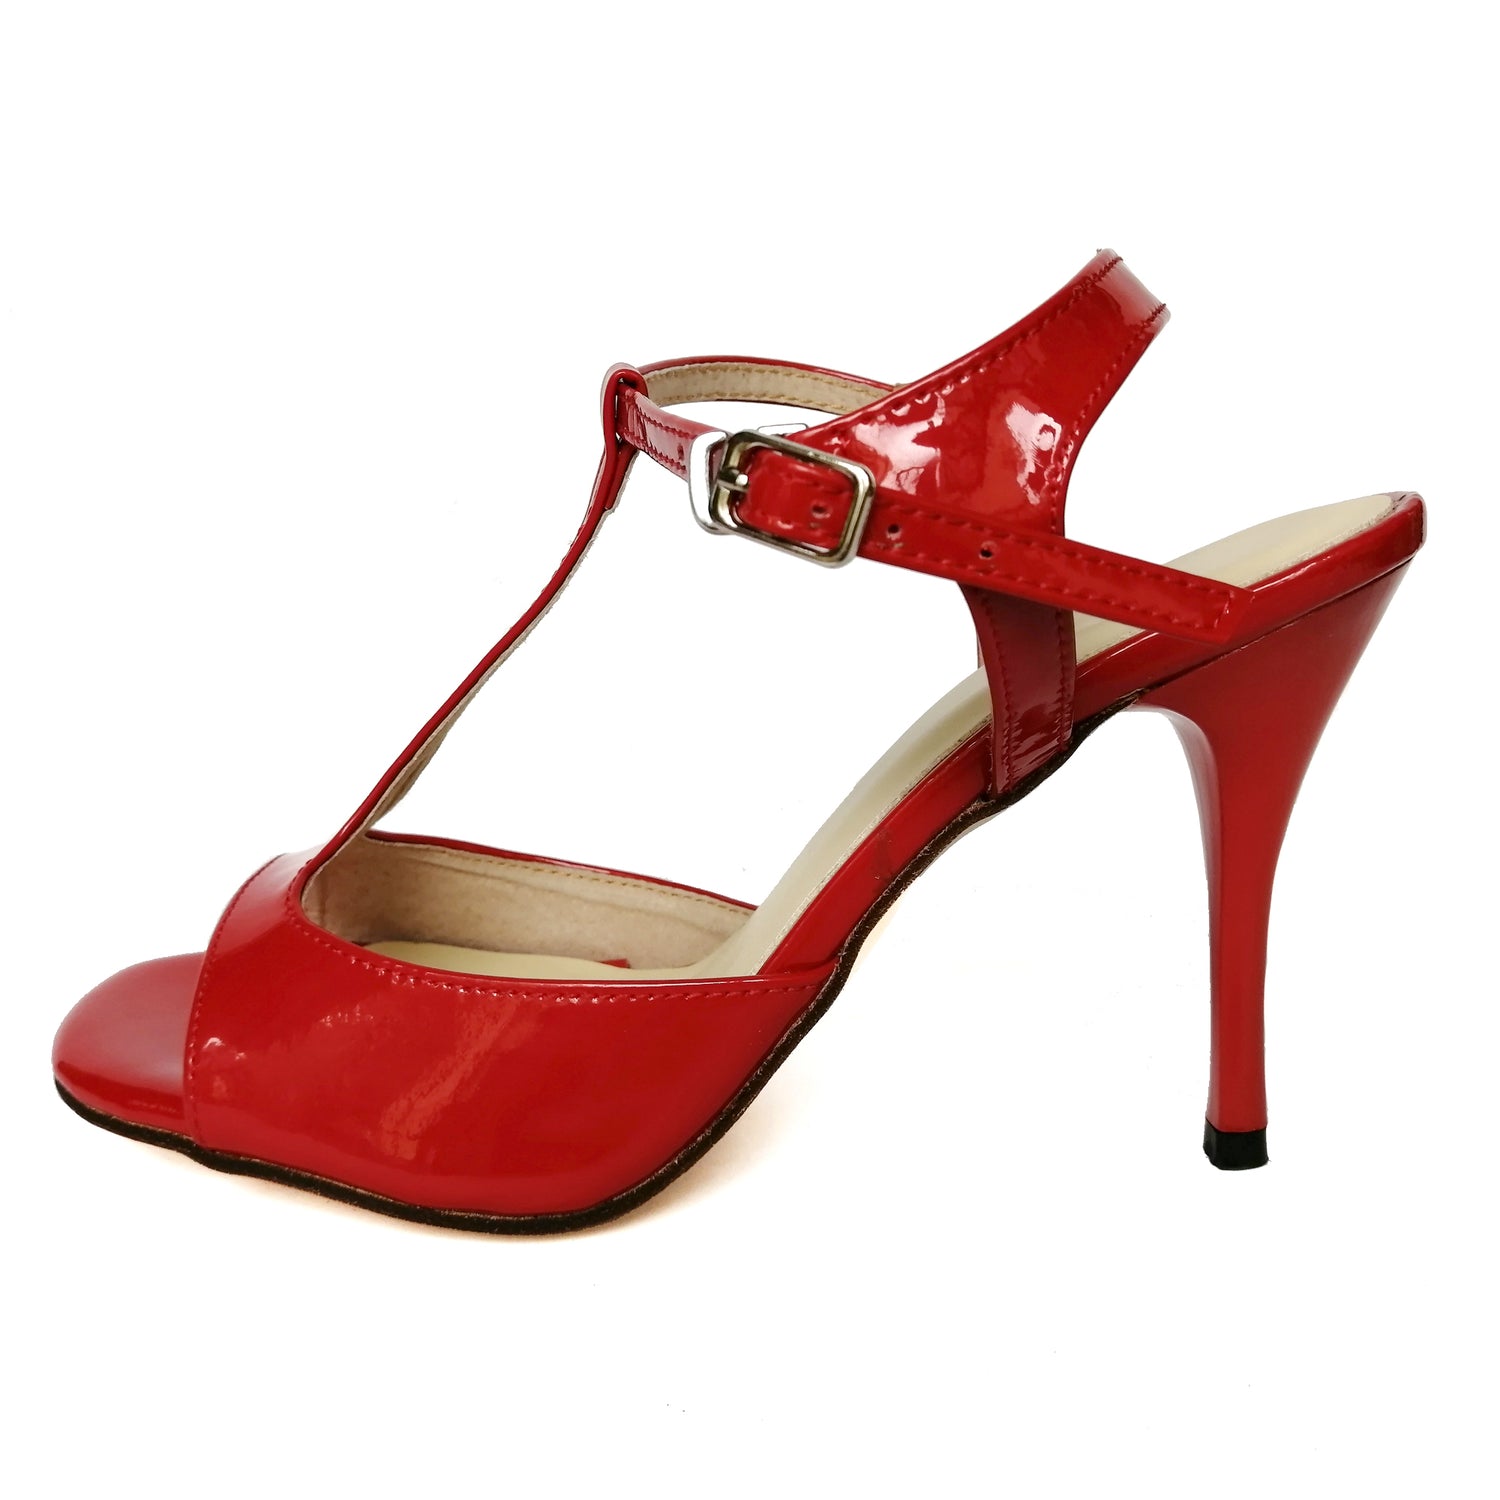 Pro Dancer red leather high heels for Argentine Tango5